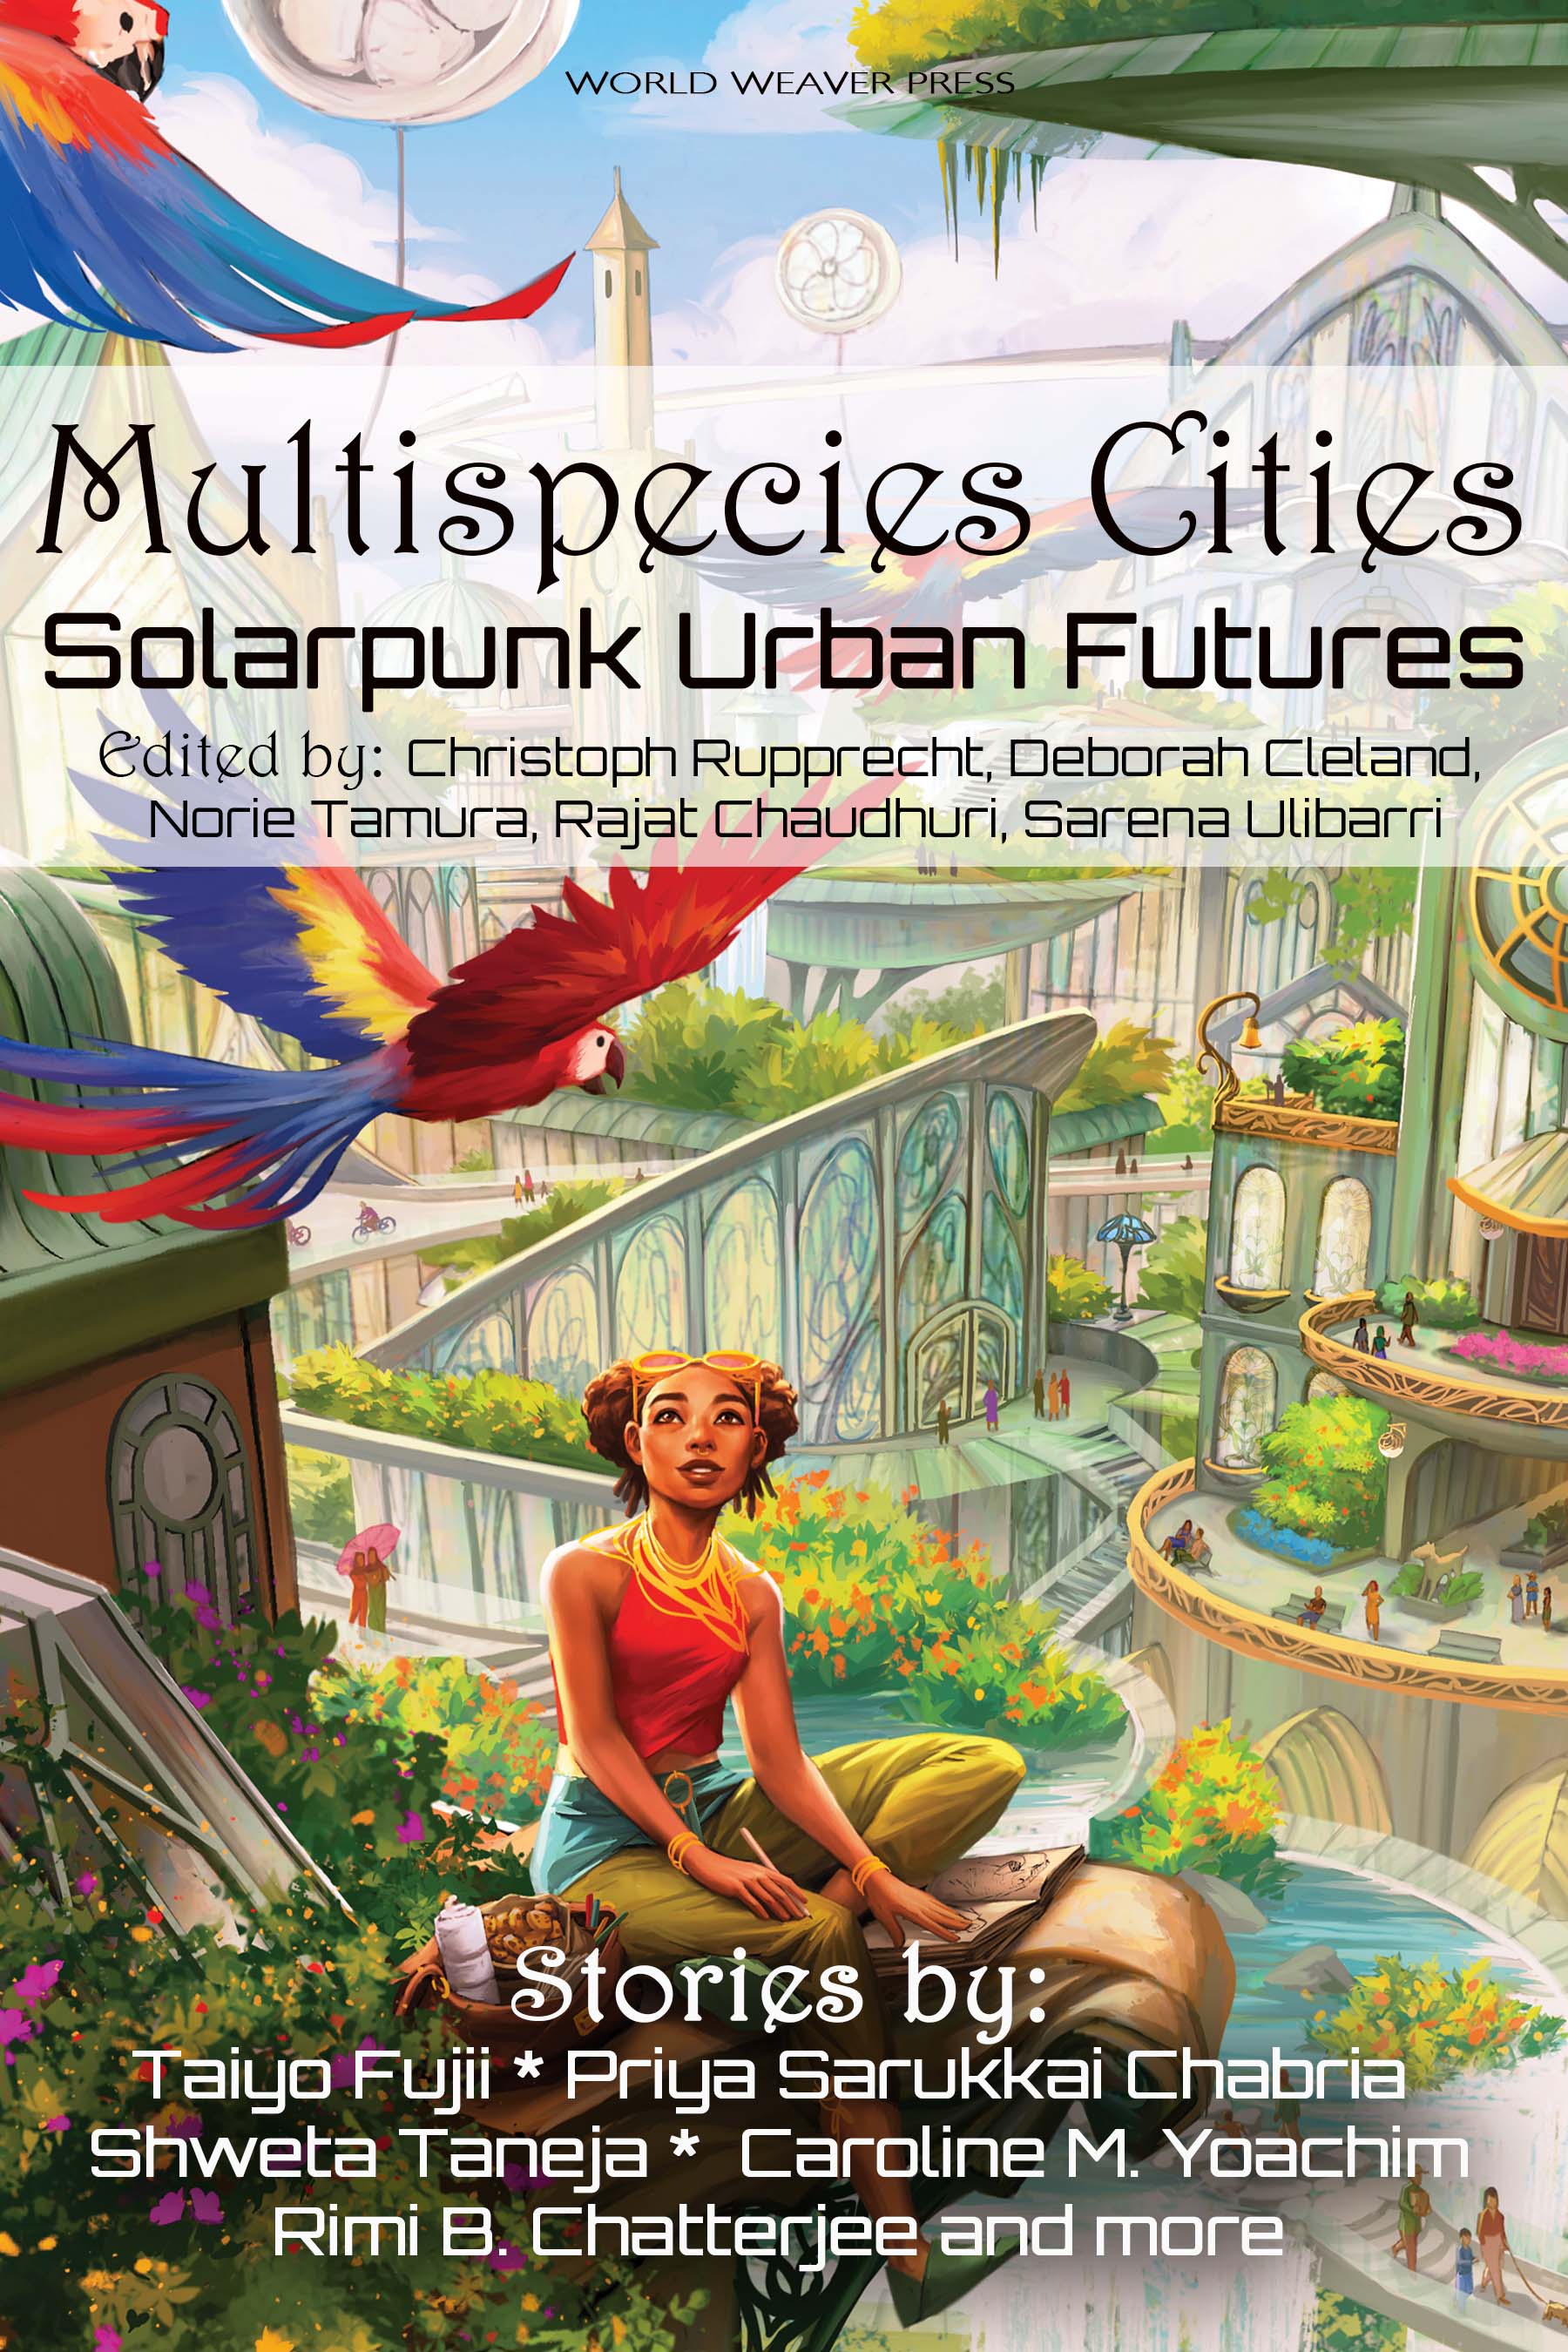 Cover image of Multispecies Cities book with illustation and title